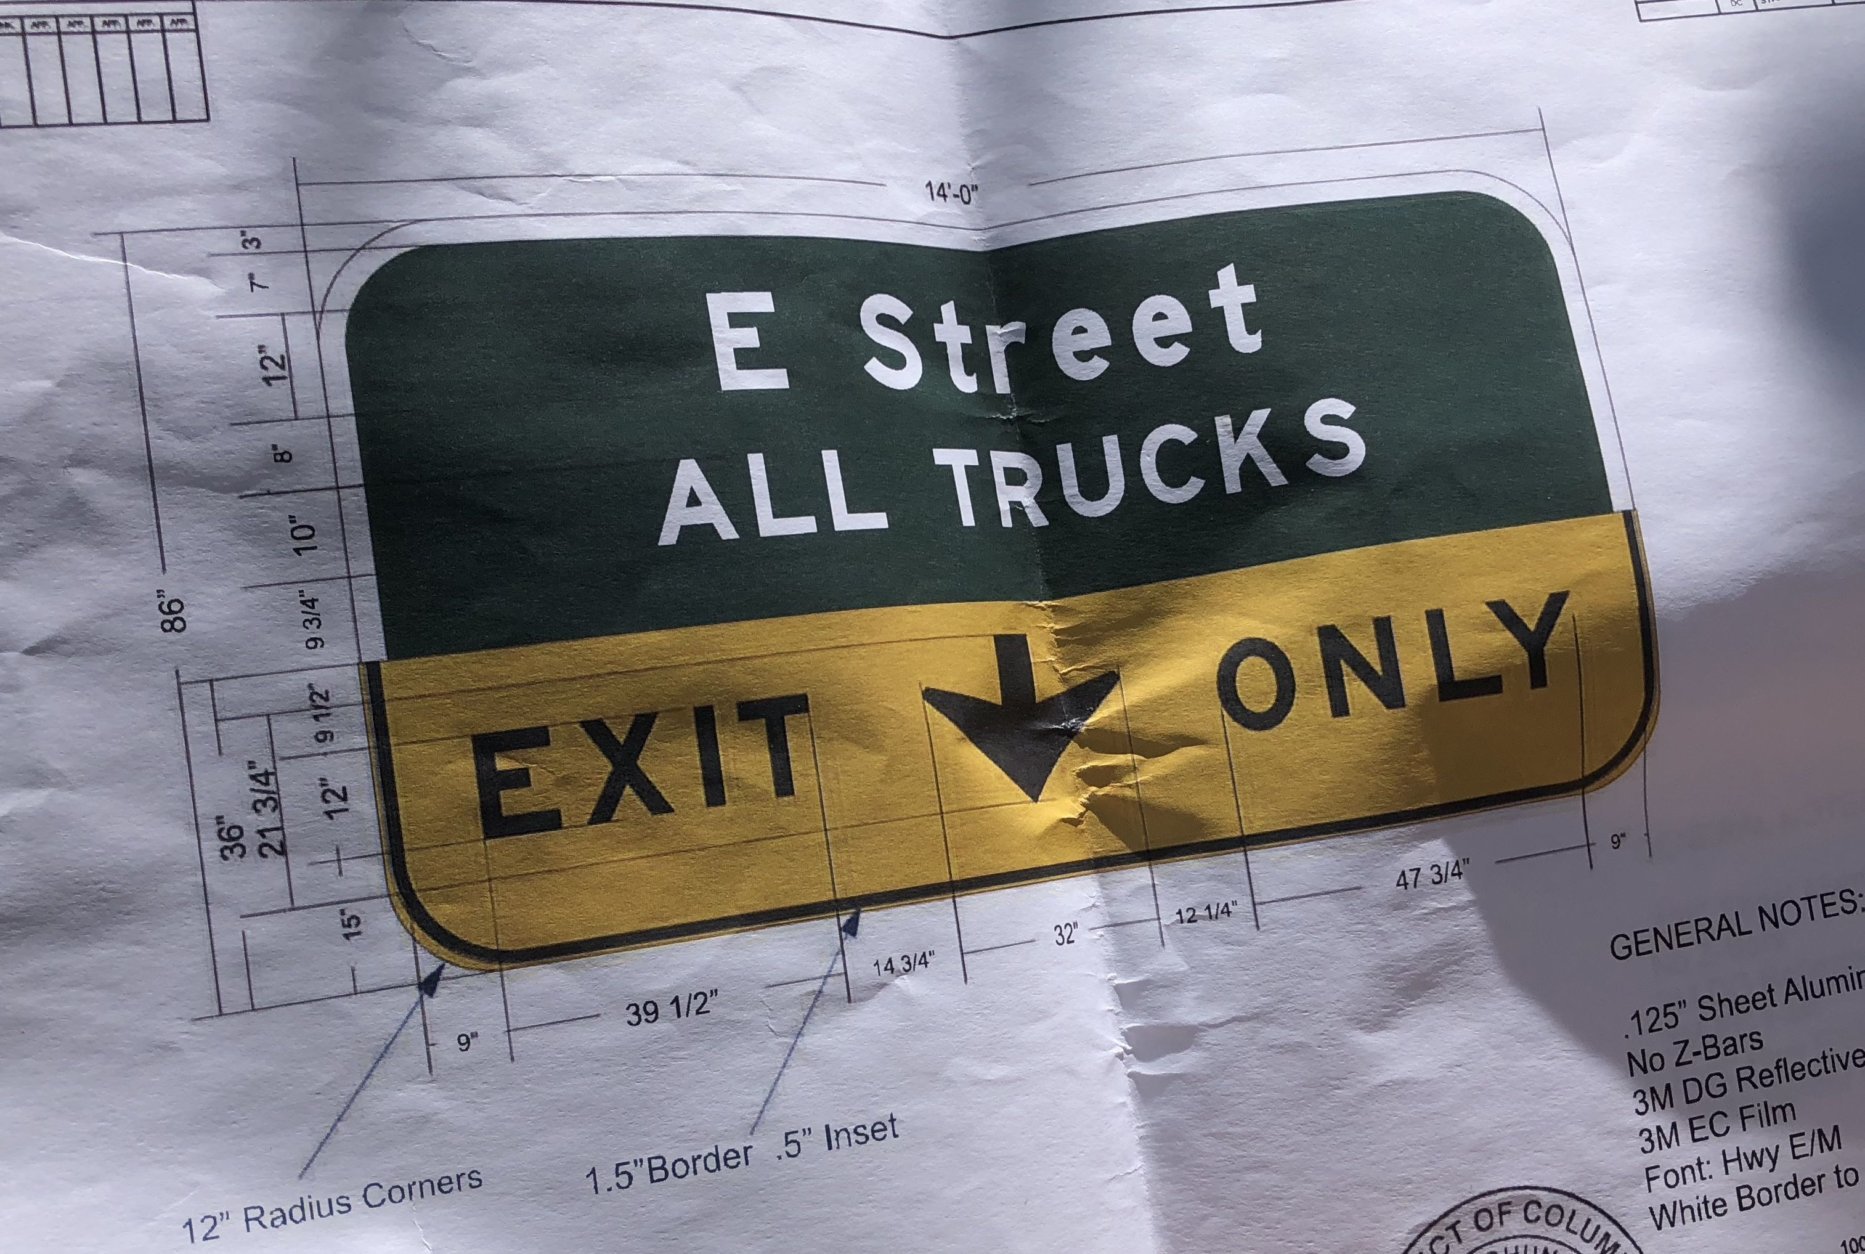 A diagram of the new overhead guide sign for the E Street Expressway. Since trucks are not allowed on I-66 inside the Beltway and commercial vehicles are not allowed on National Park Service roads, all trucks must.exit onto E Street NW. (WTOP/Dave Dildine)